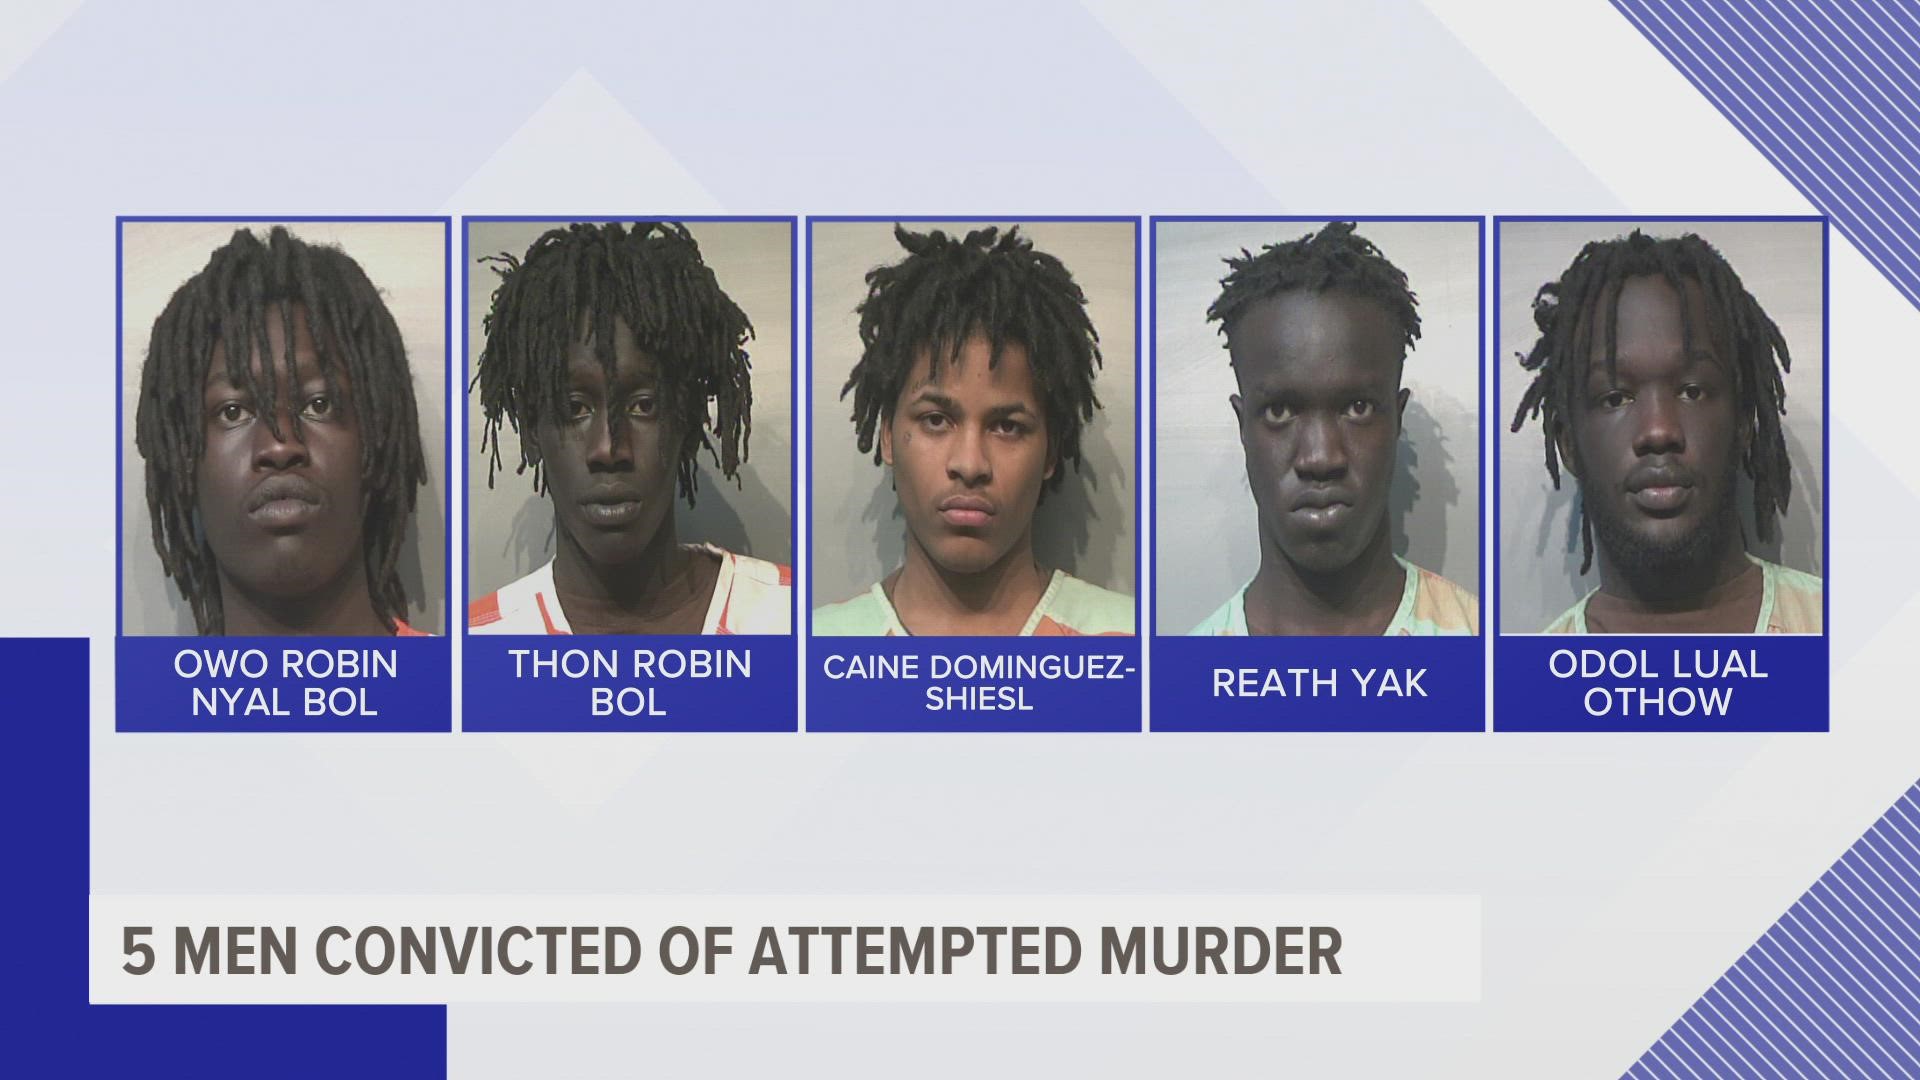 The Polk County Attorney's Office says the five individuals convicted had shot at three children inside a house, hitting a 2-year-old boy in the head.